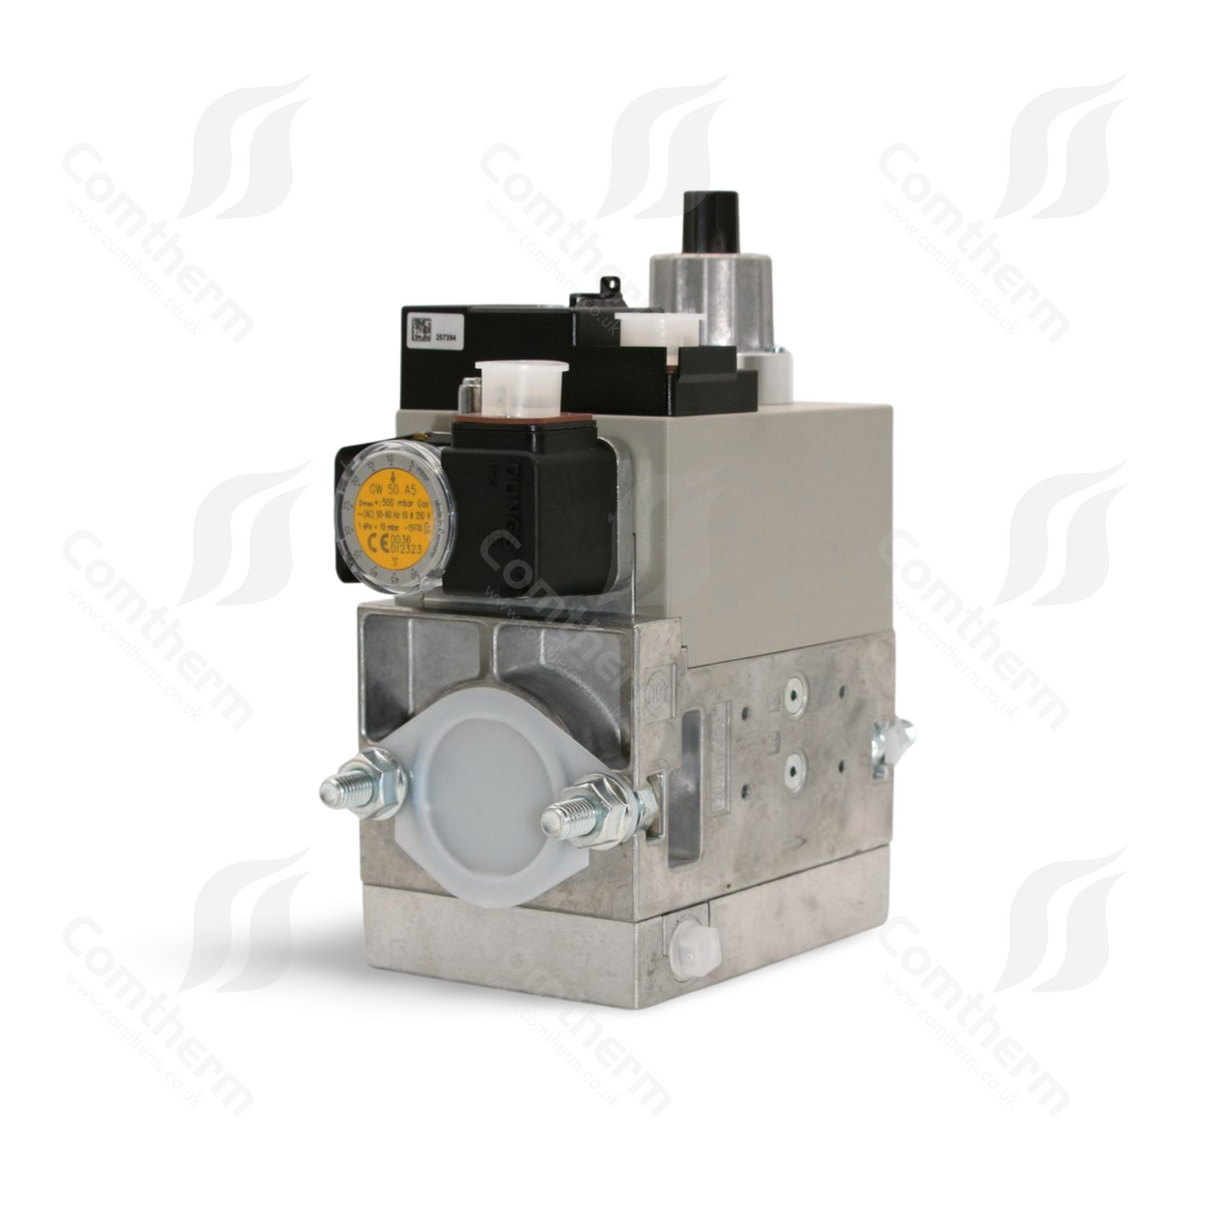 Dungs MB-DLE 412 B01 S52 + GW150A5 Multibloc Gas Valve - 230v